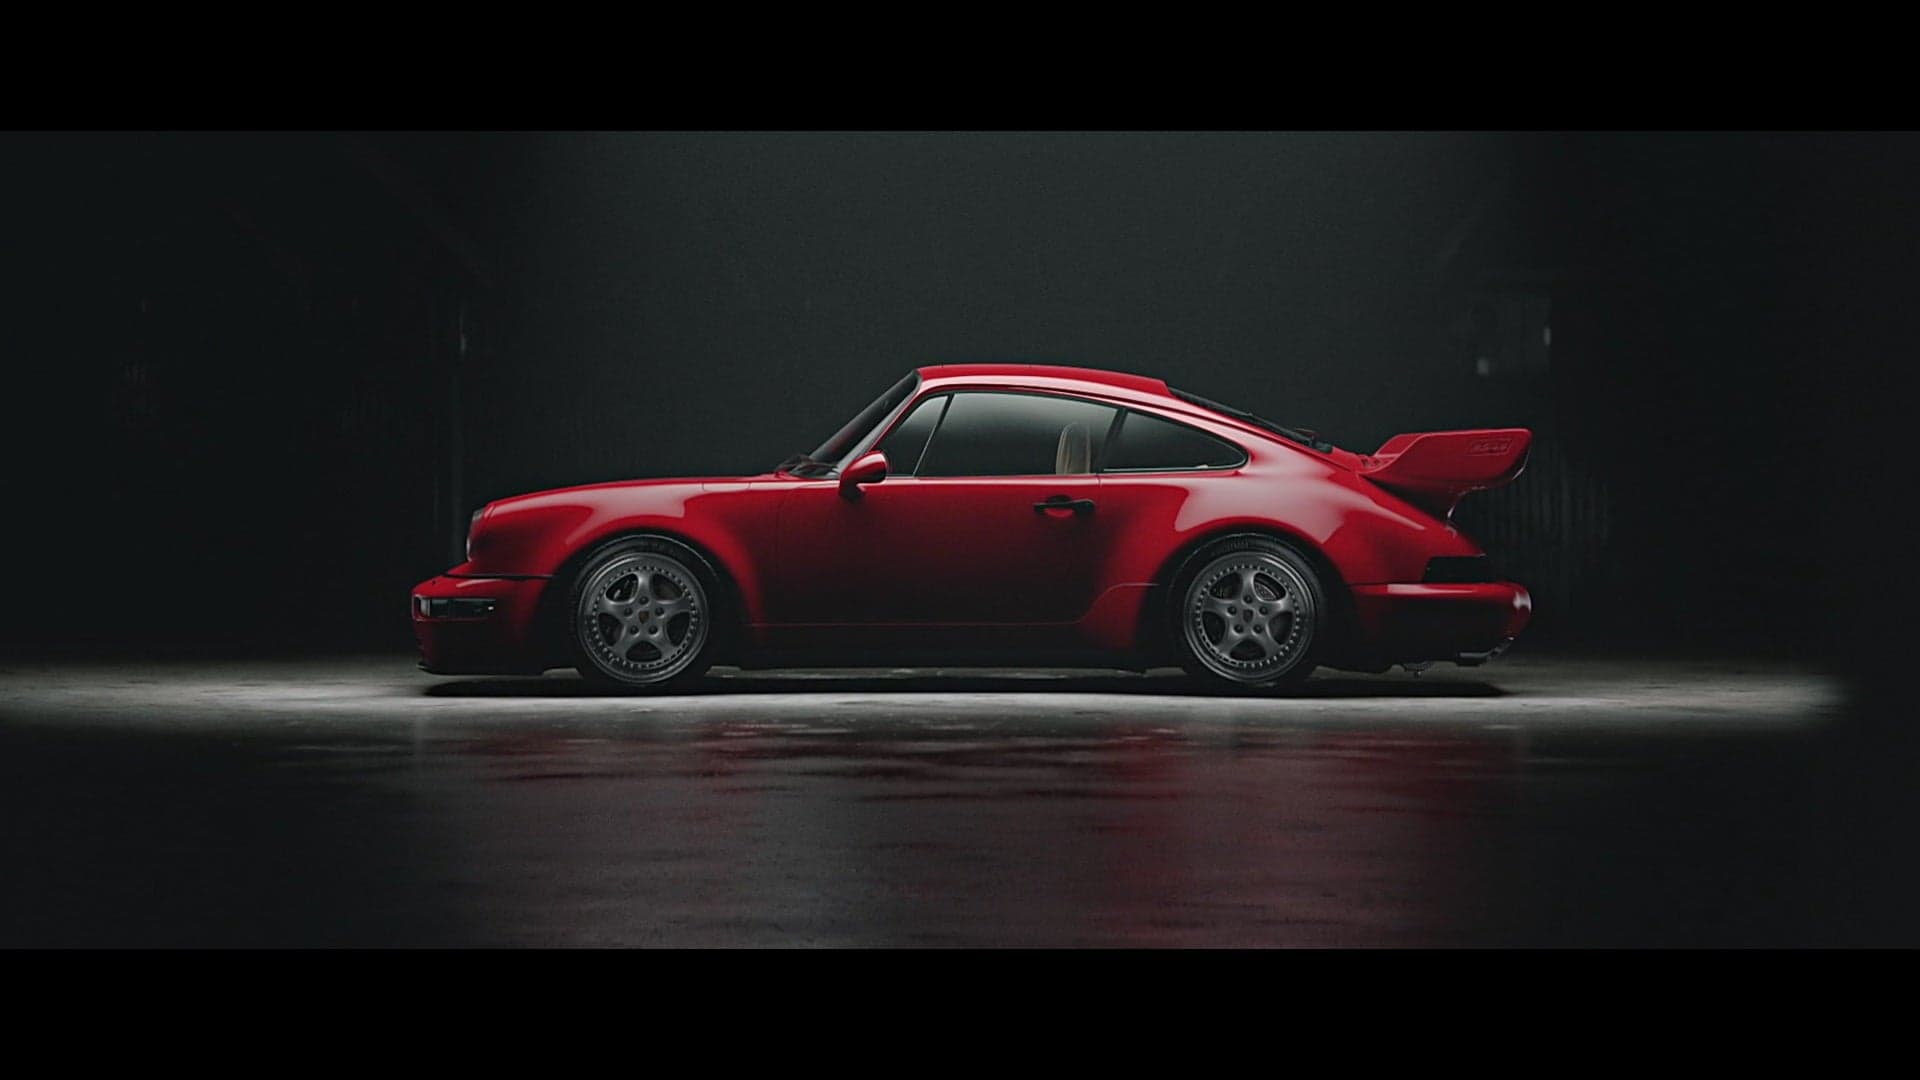 You’ll Never Believe This 964 Carrera RS Isn’t Real